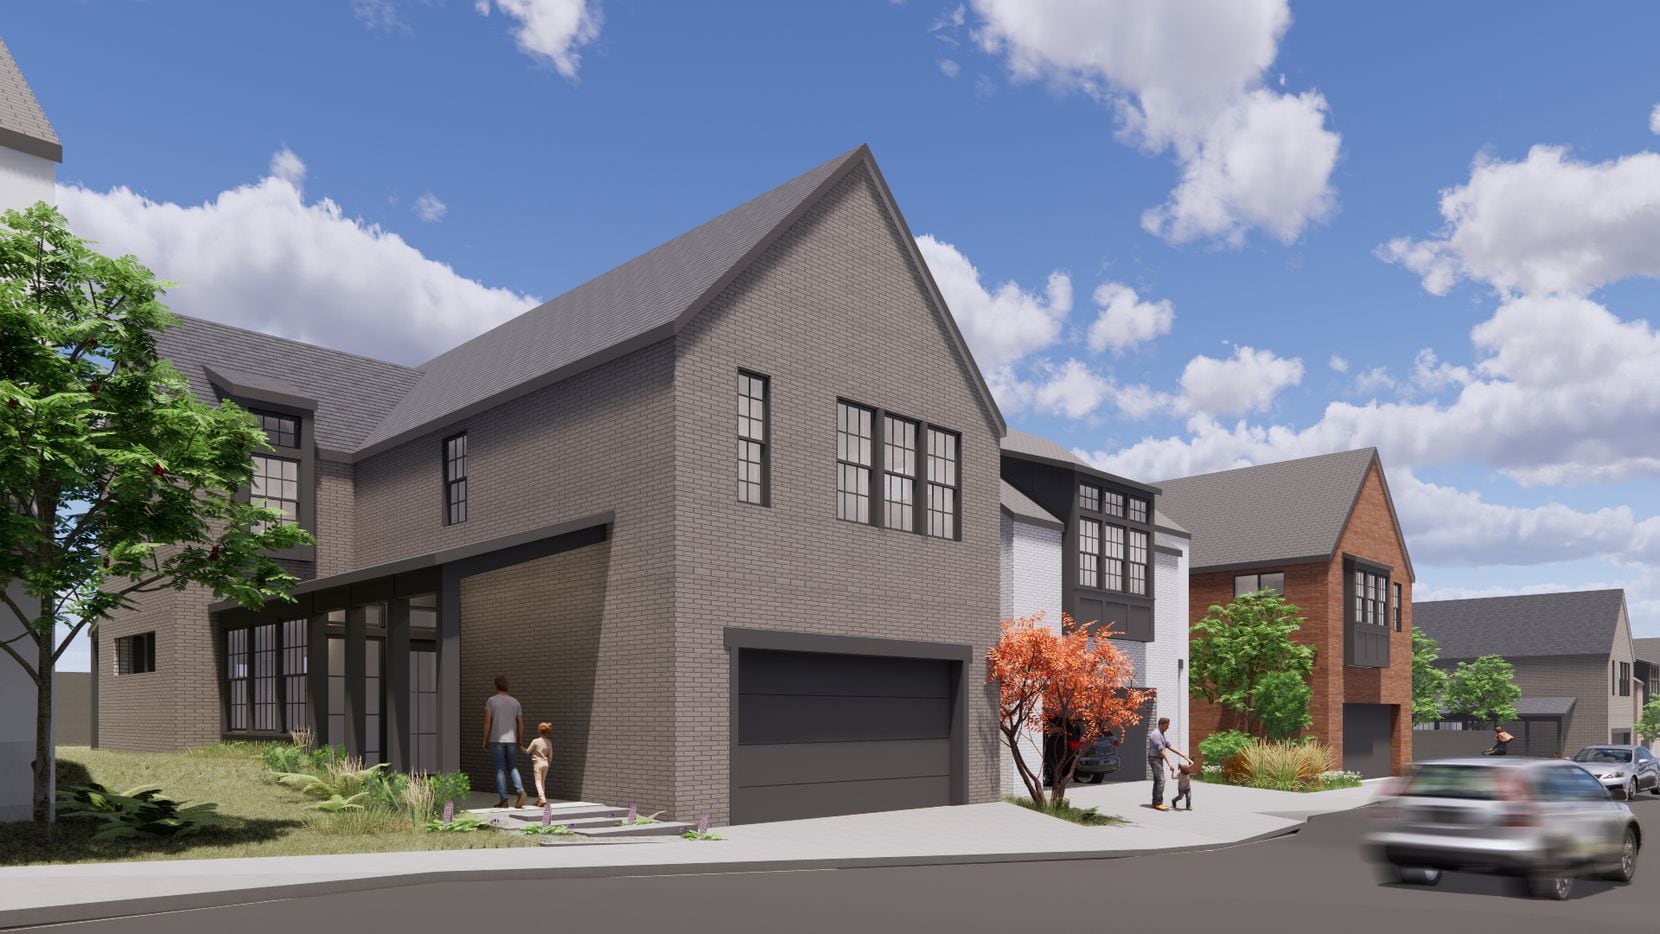 StoryBuilt Homes' new neighborhood will have houses starting in the mid-$700,000s.